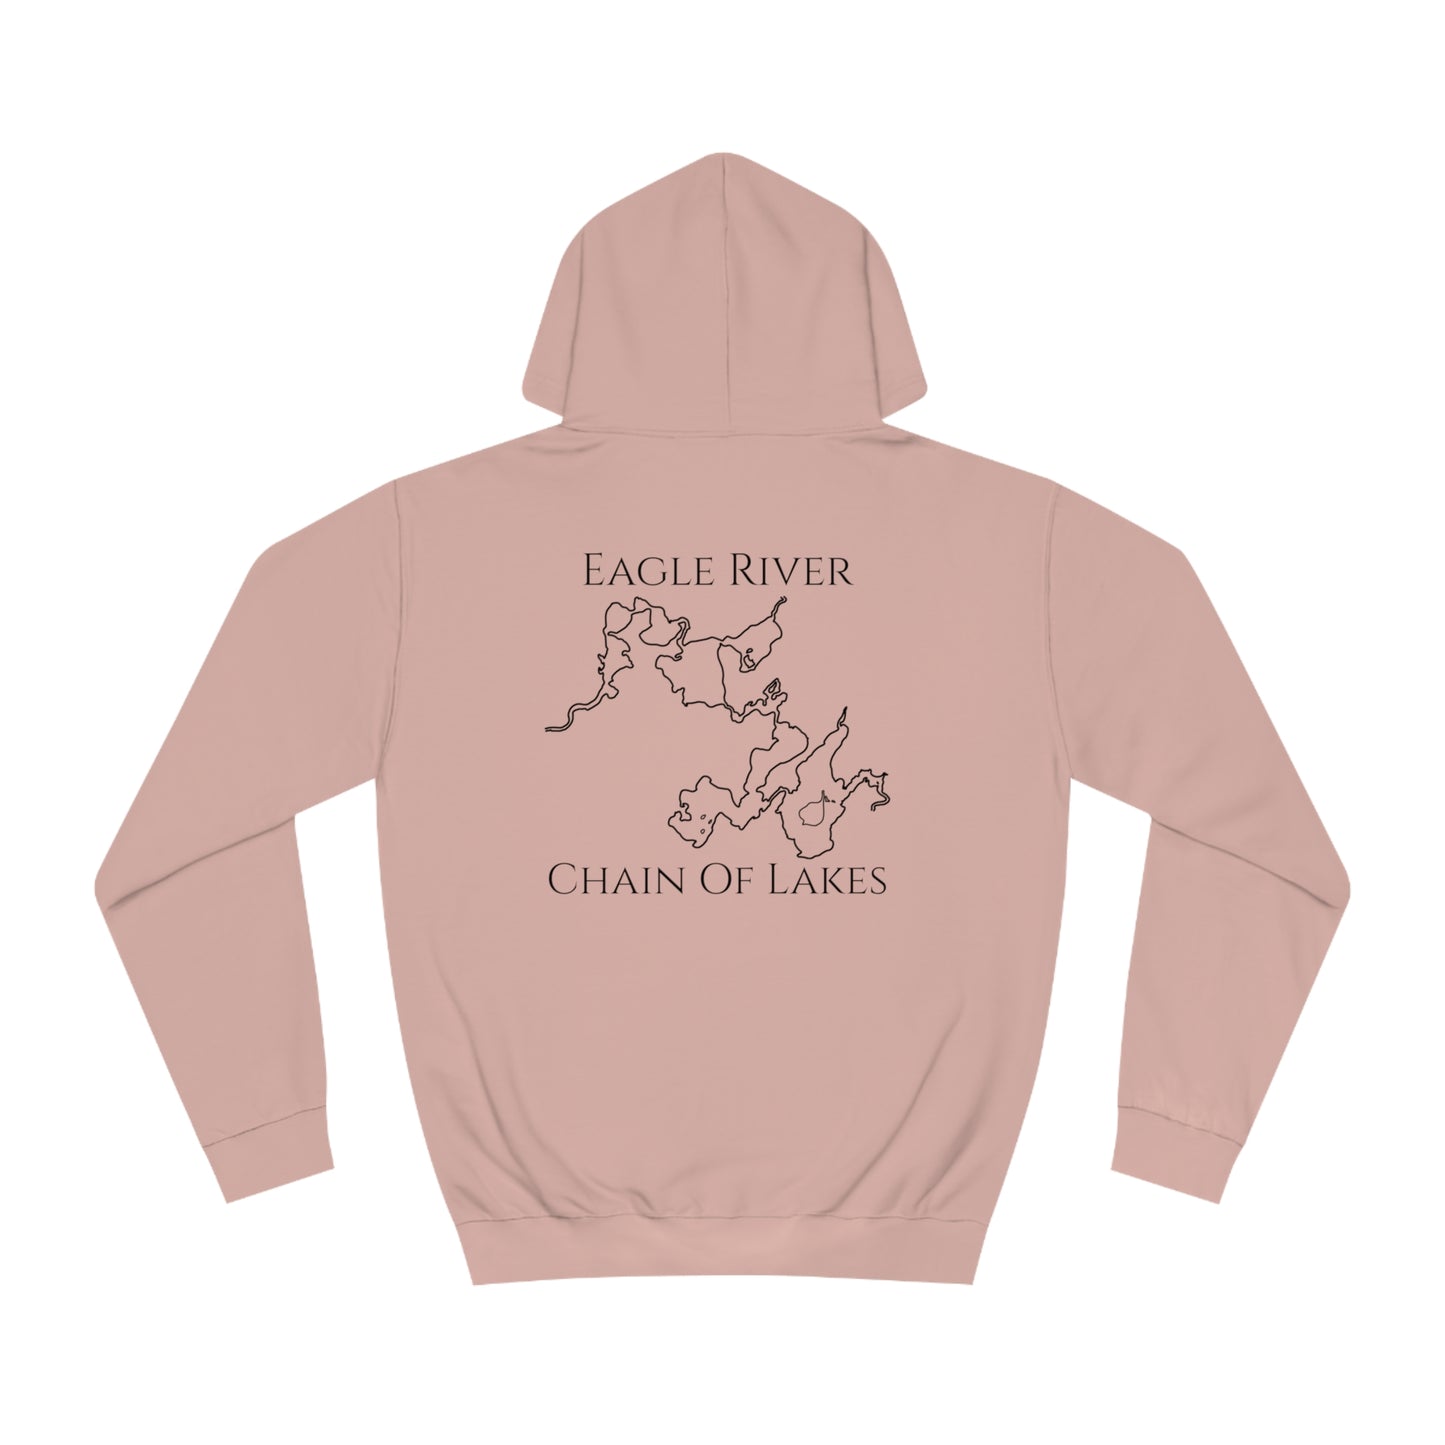 Eagle River Pontoon Boat Family Patch - Lac LaBelle Unisex Hoodie Medium Weight